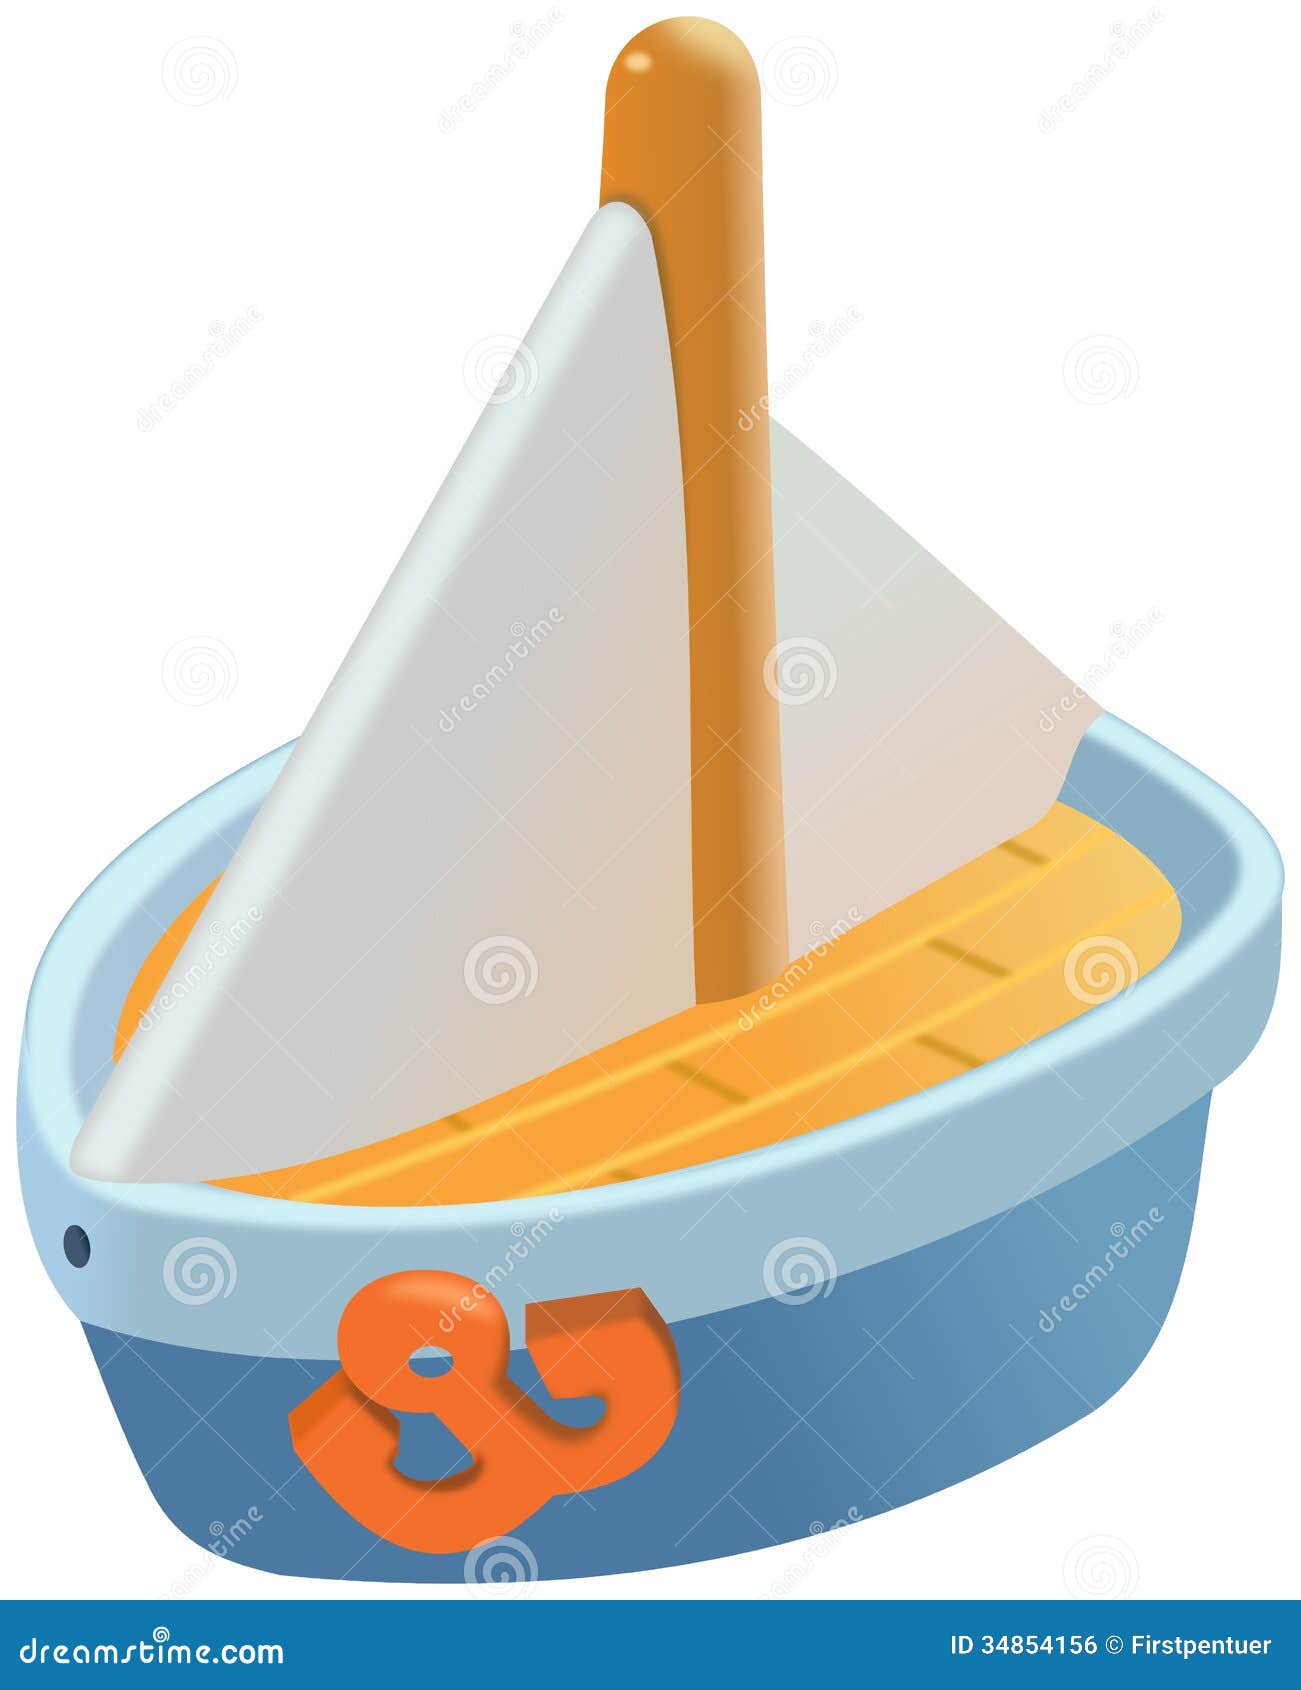 Small Blue Plastic Sailboat Toy Royalty Free Stock Image ...